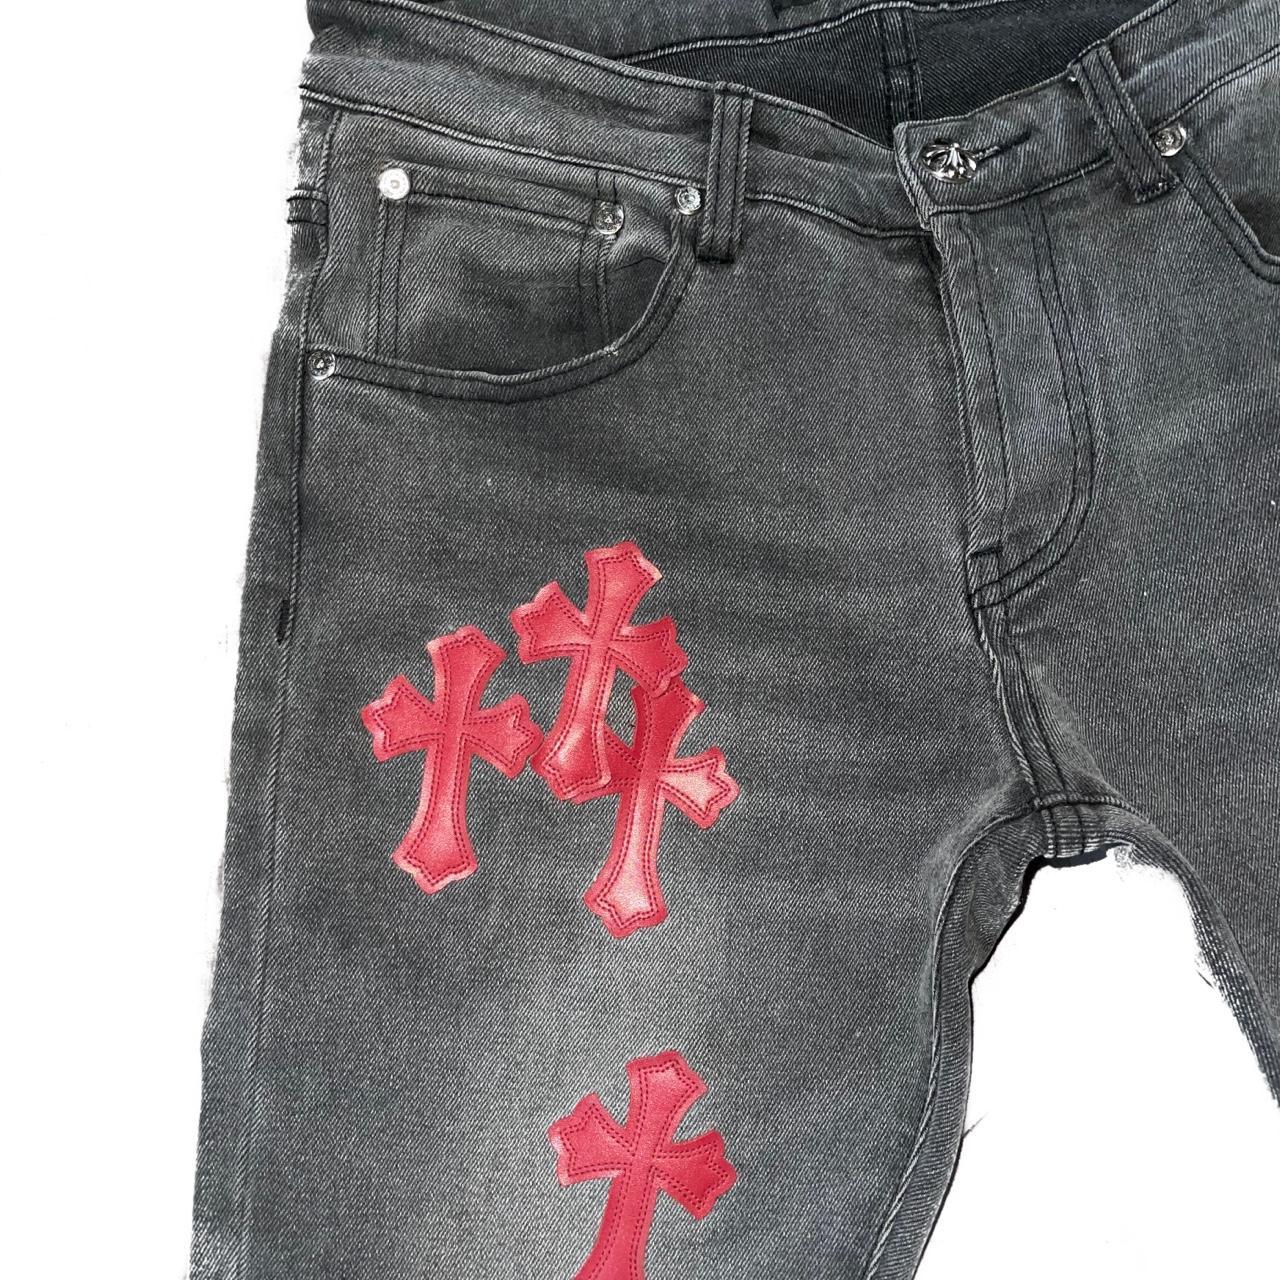 Chrome Hearts Fitted Grey Denim Red Cross Patch Jeans - Depop